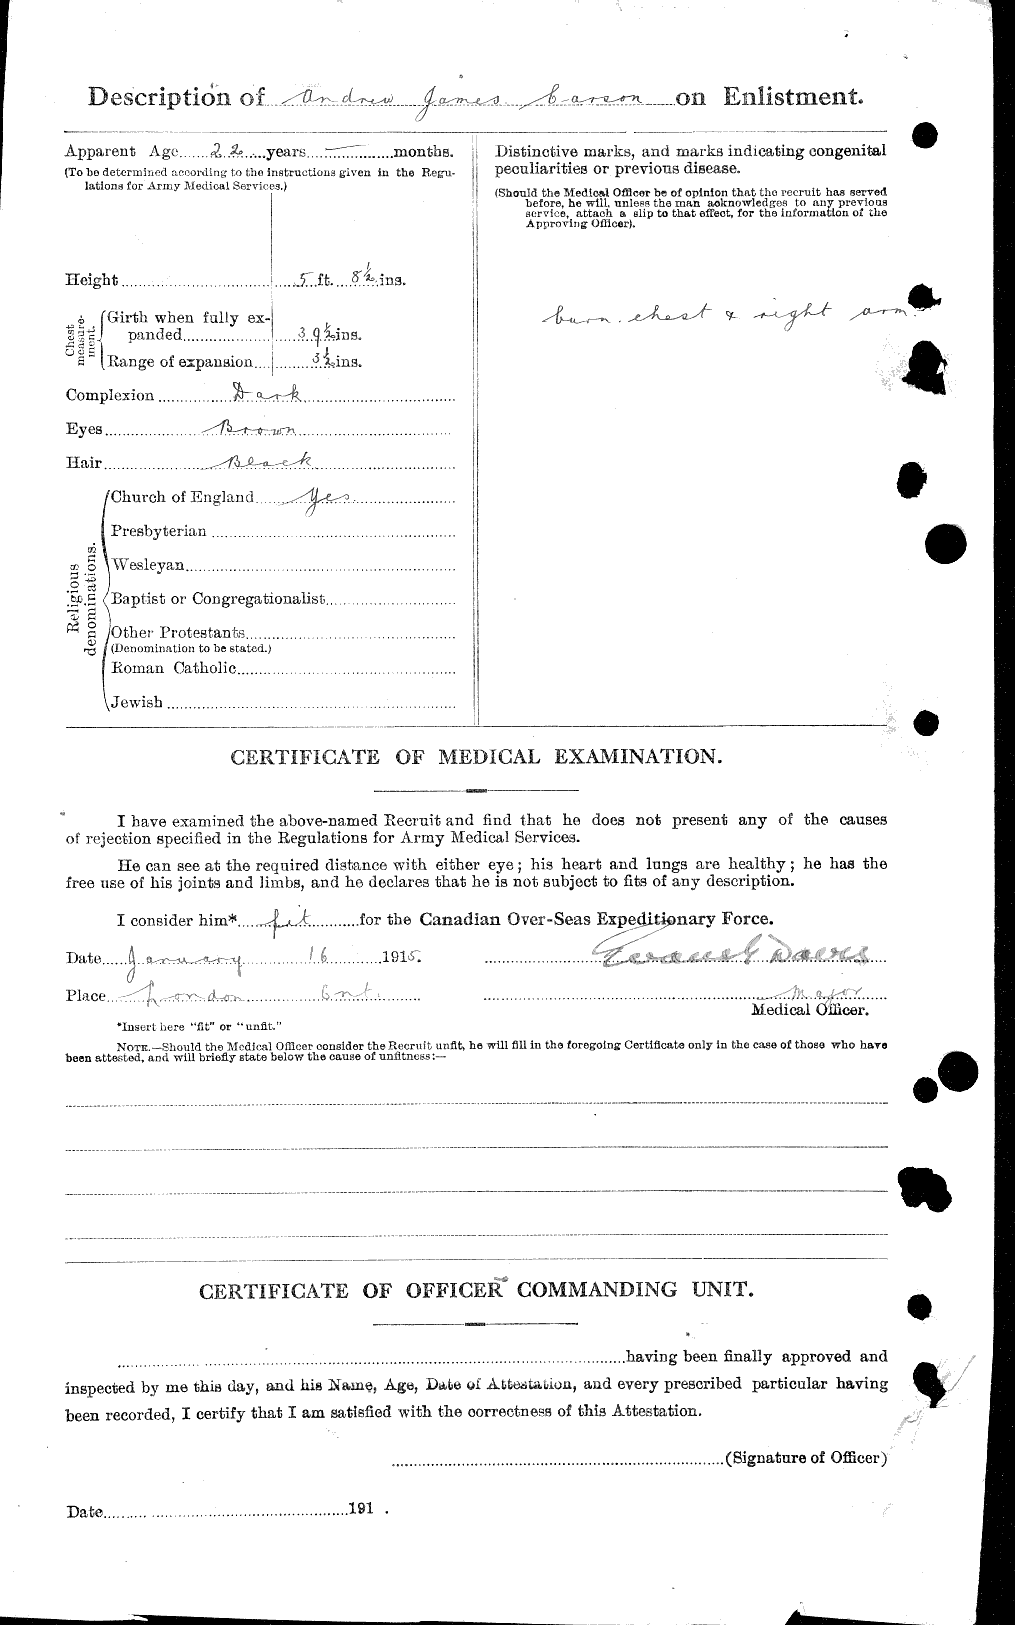 Personnel Records of the First World War - CEF 005820b